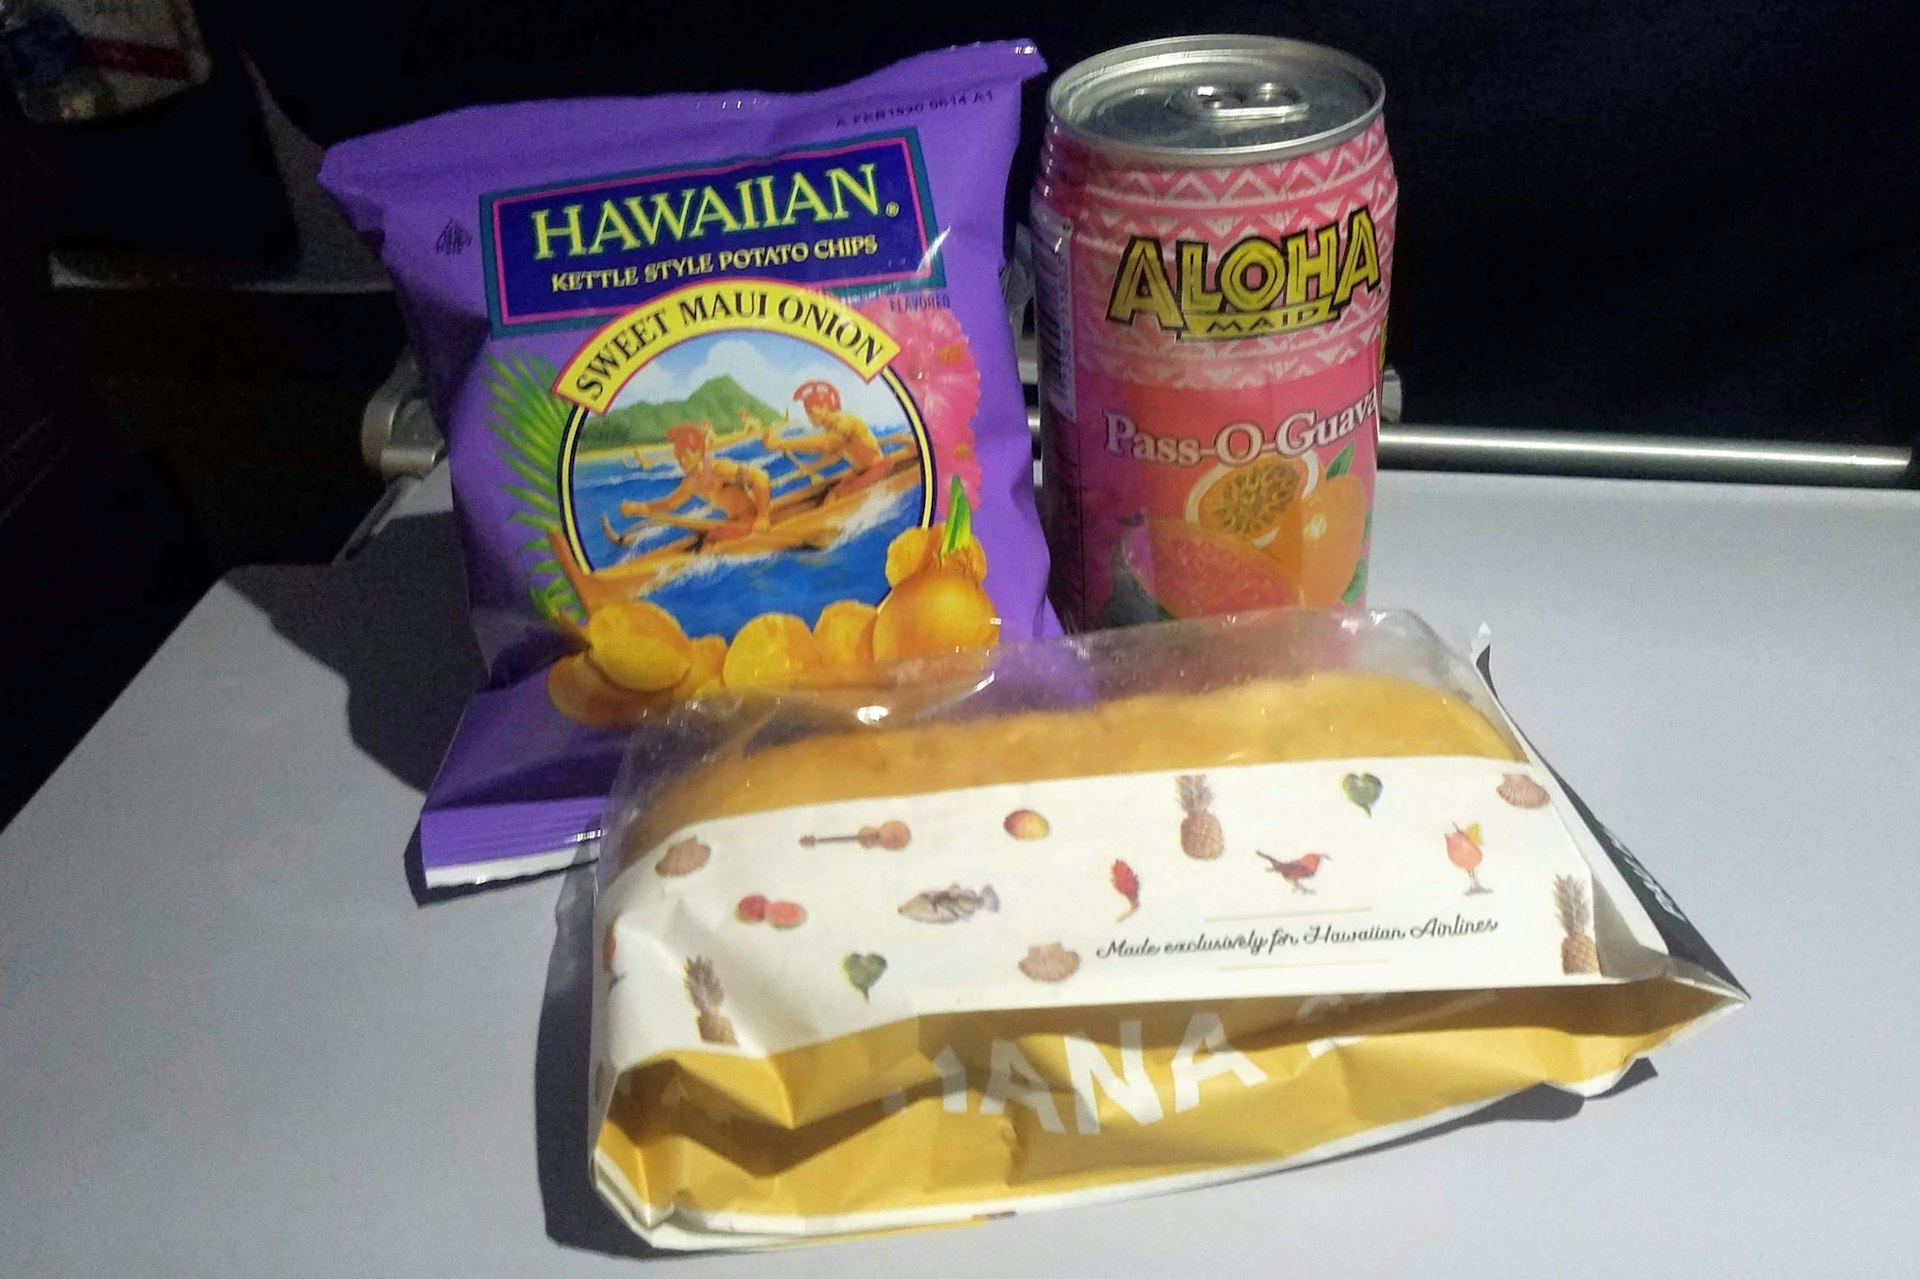 A look at a light hot meal on board a Hawaiian Airlines flight